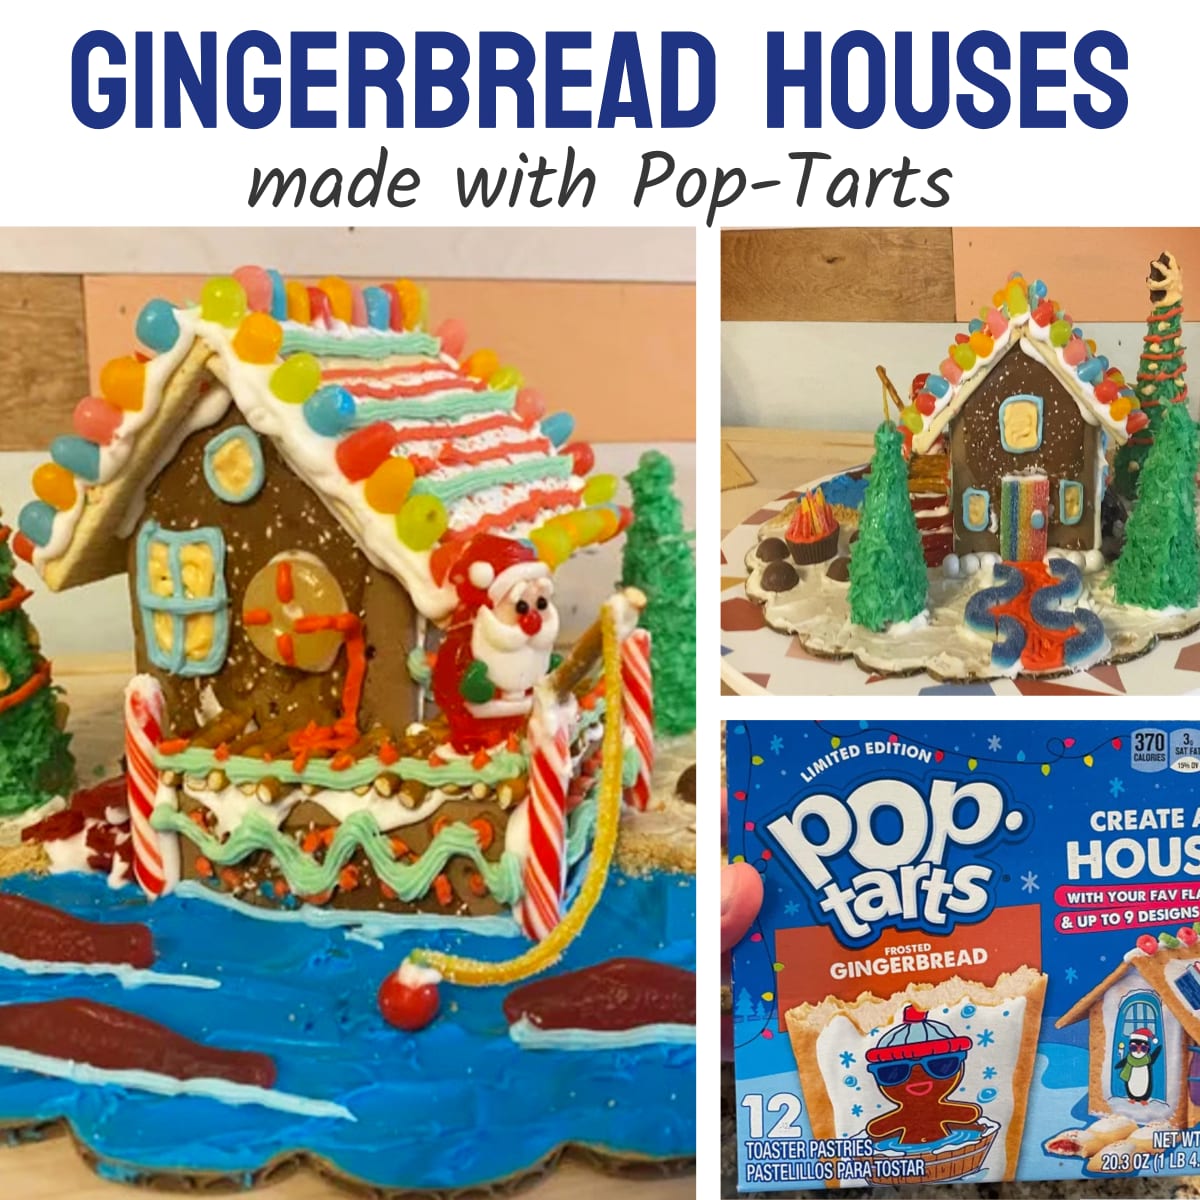 gingerbread village houses ideas made with Pop-Tarts